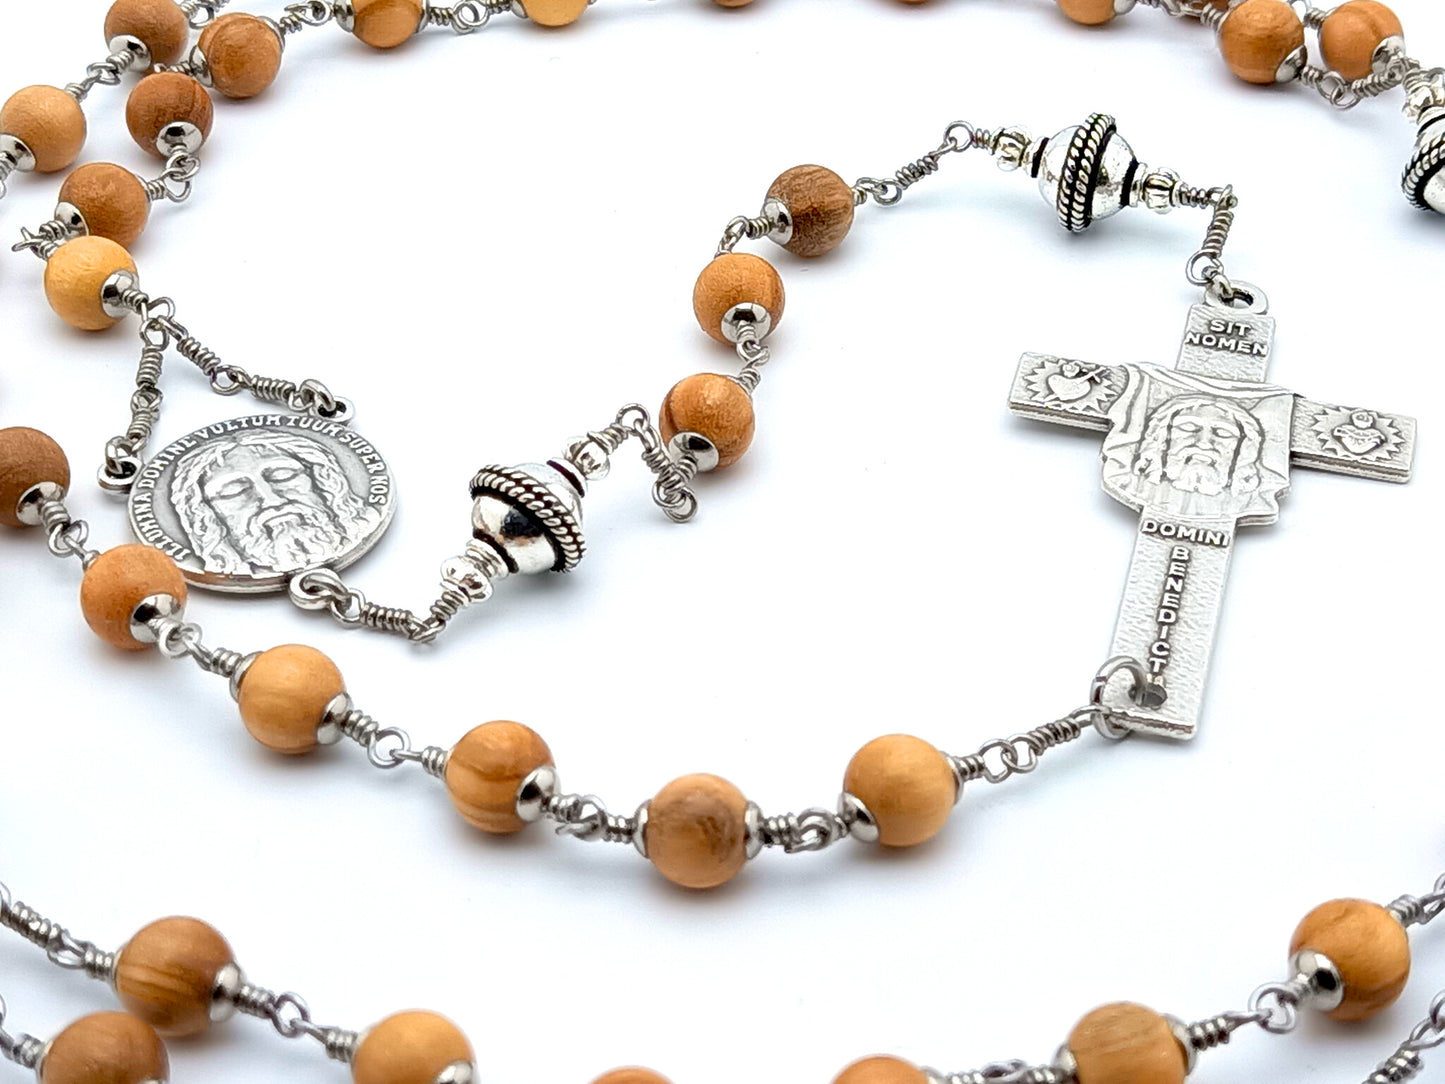 Holy Face of Jesus unique rosary beads unbreakable circular rosary with wooden and silver beads, Holy Face centre medal and crucifix.